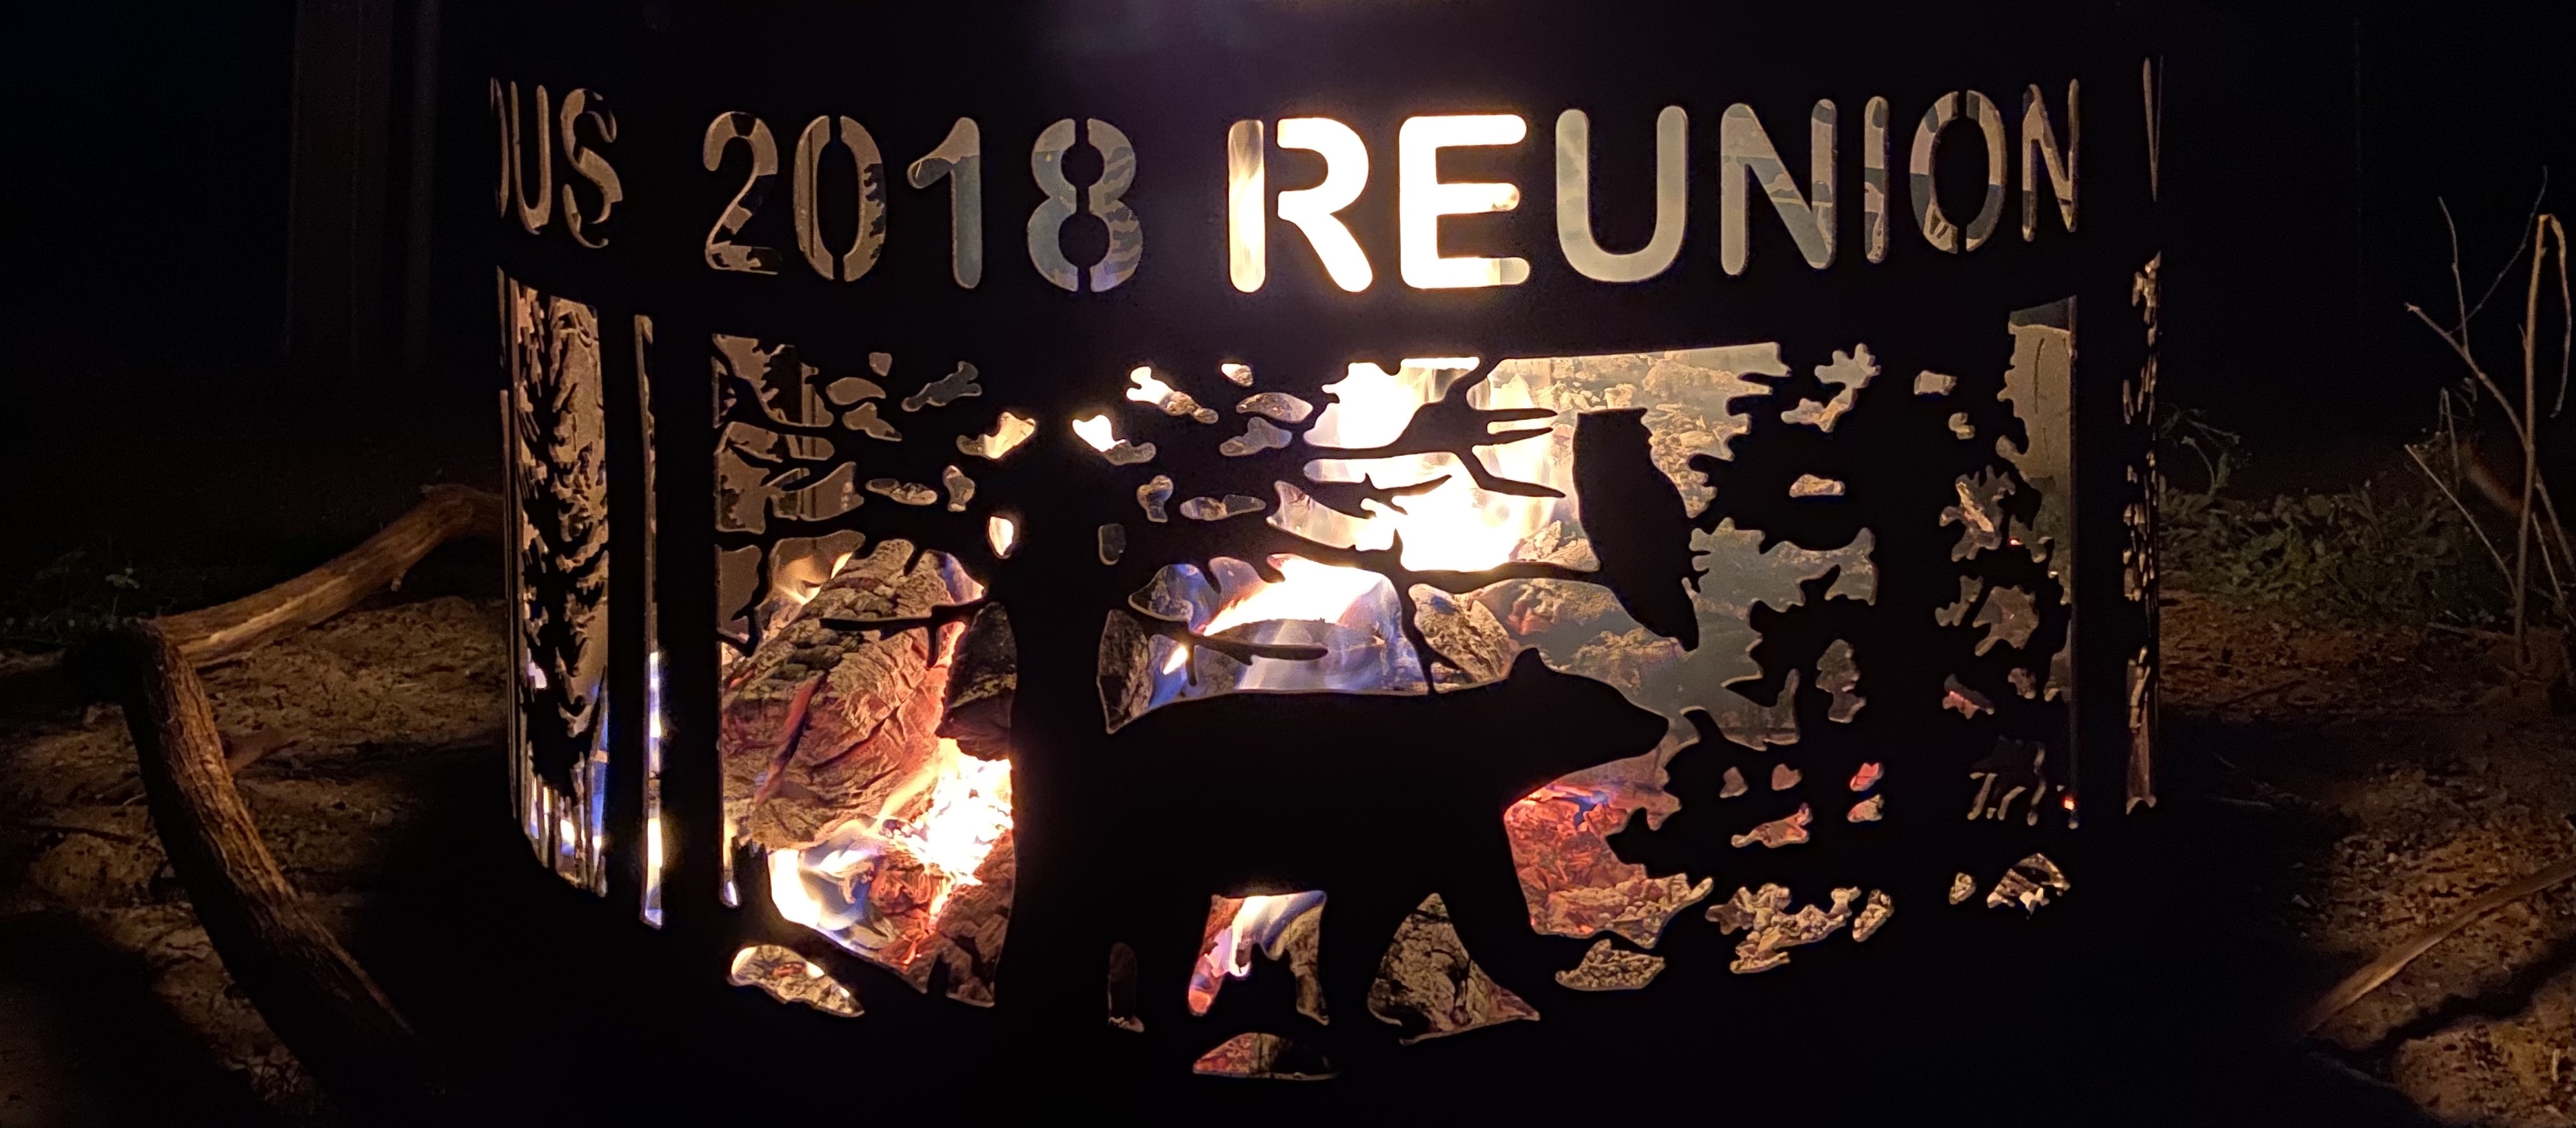 Image of iOS 2018 family reunion fire pit